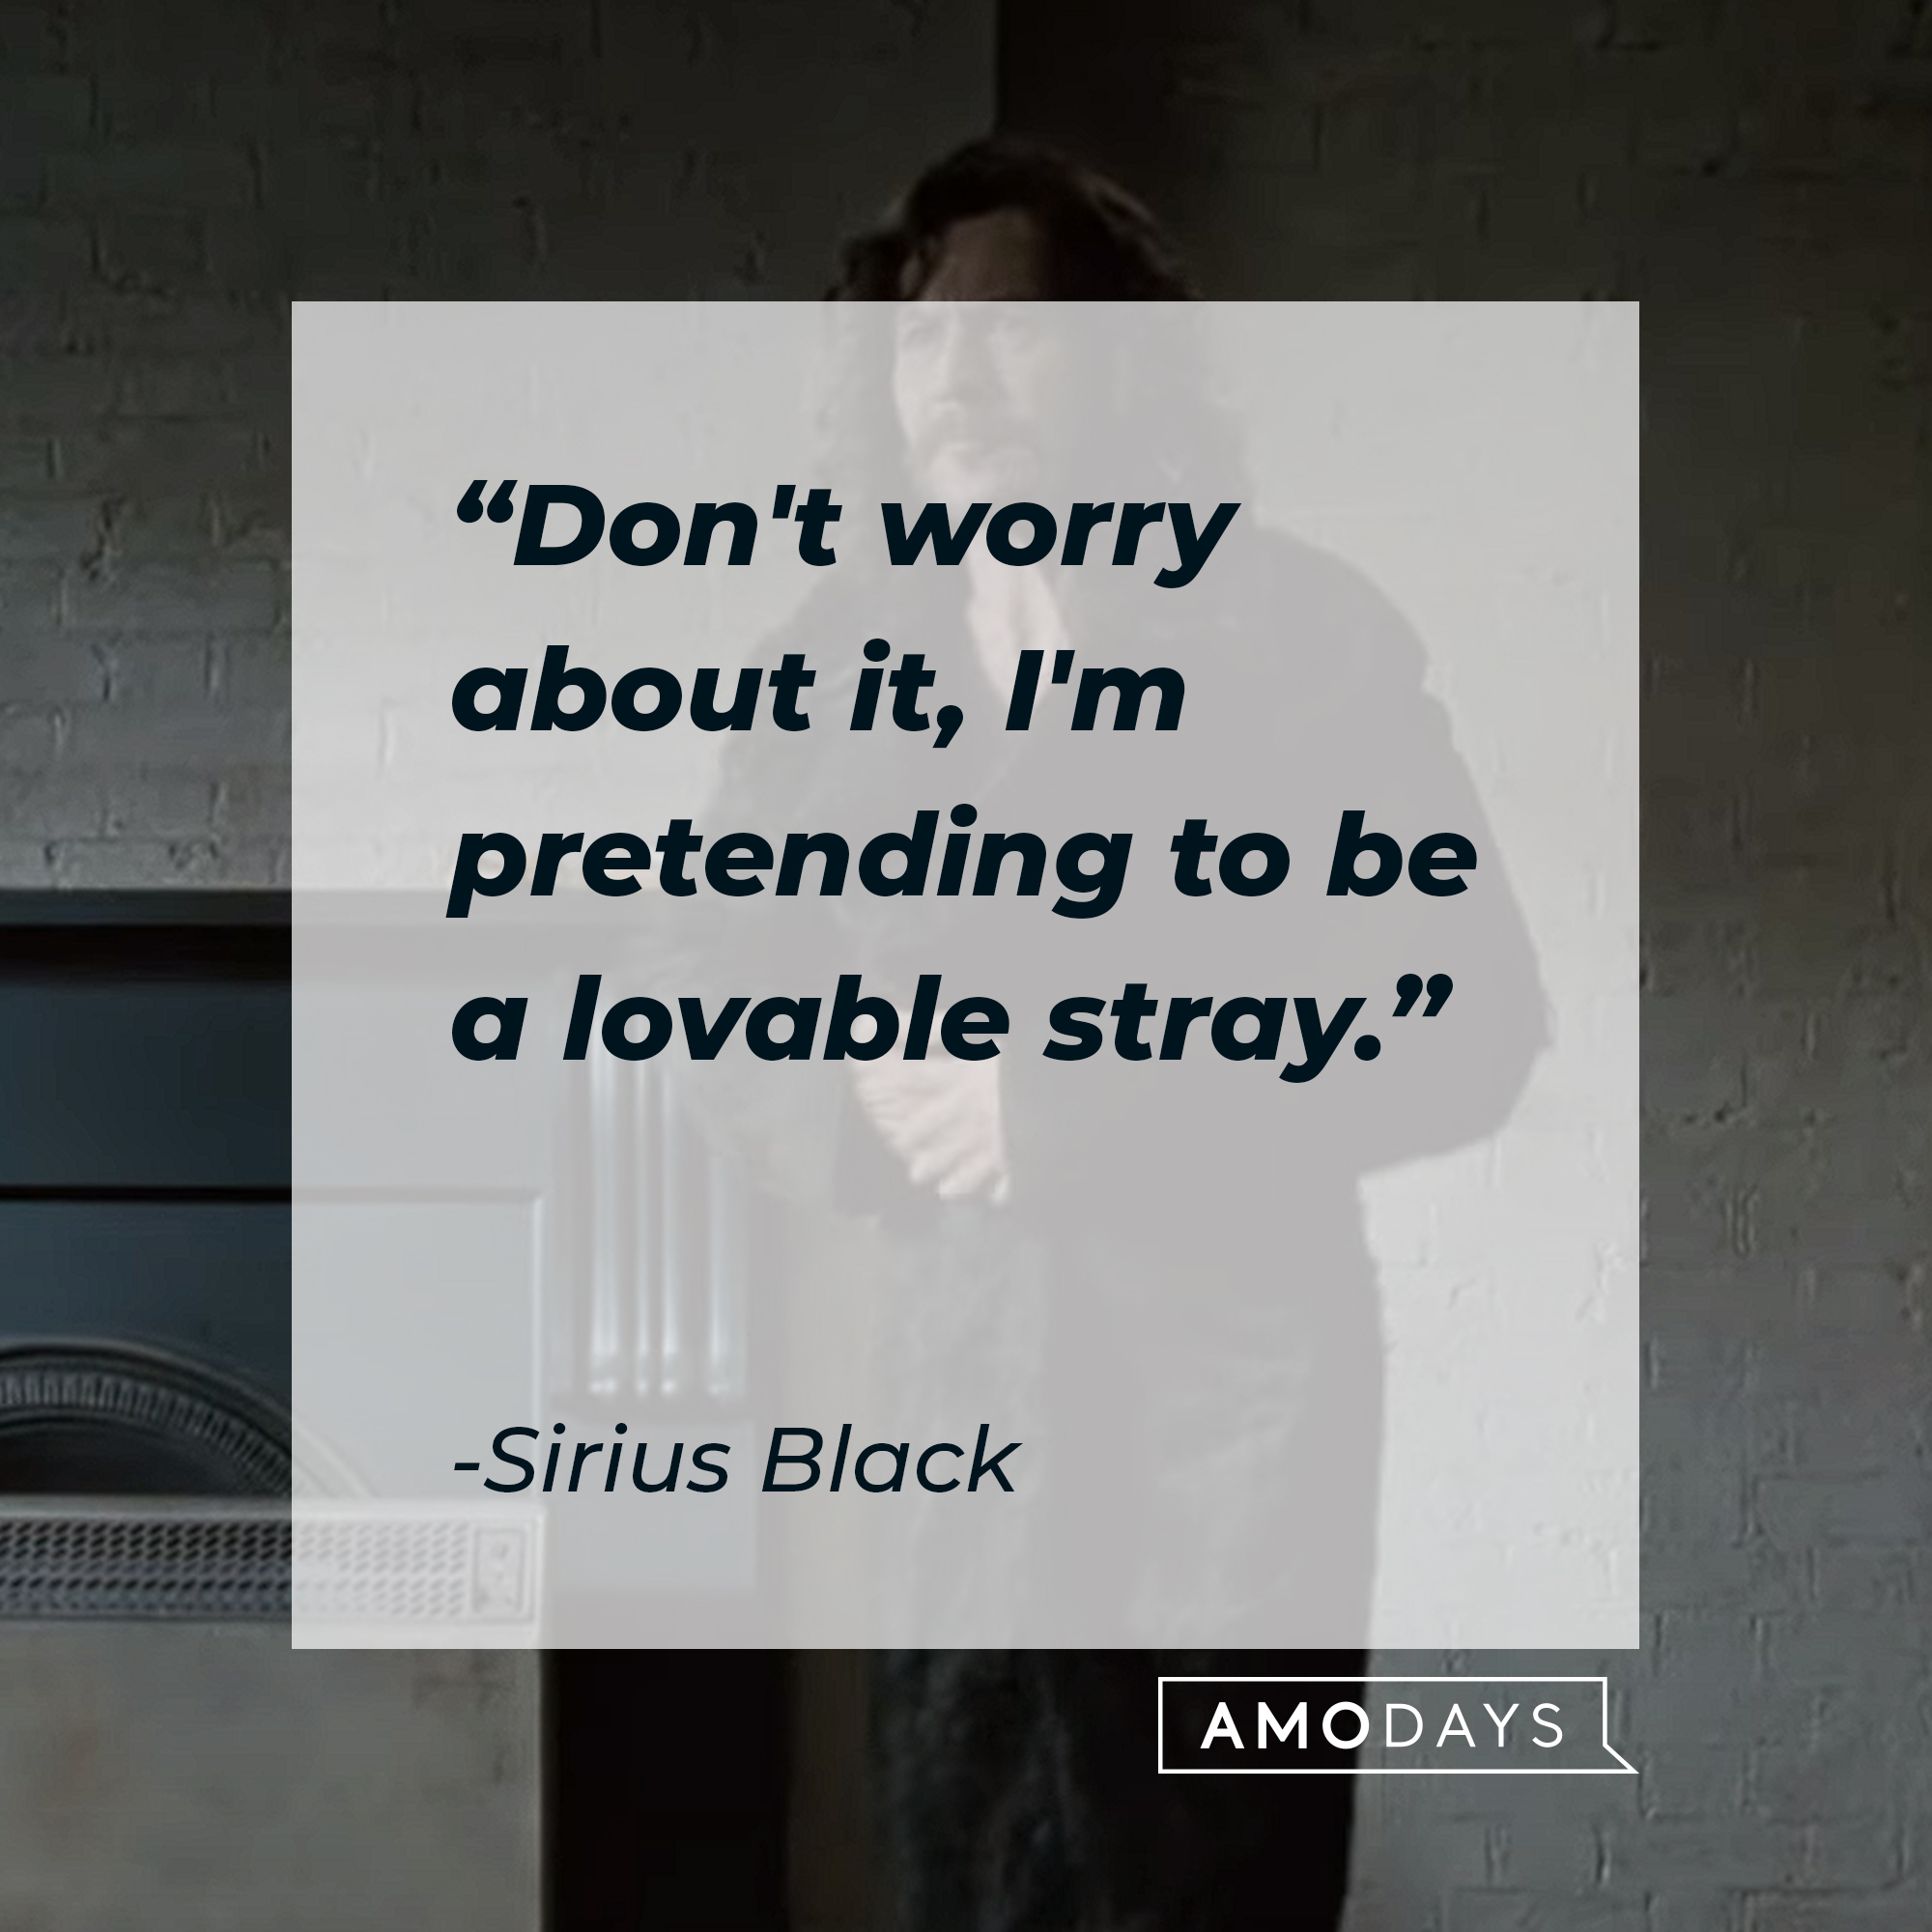 Sirius Black's quote: "Don't worry about it, I'm pretending to be a lovable stray." | Source: YouTube/harrypotter